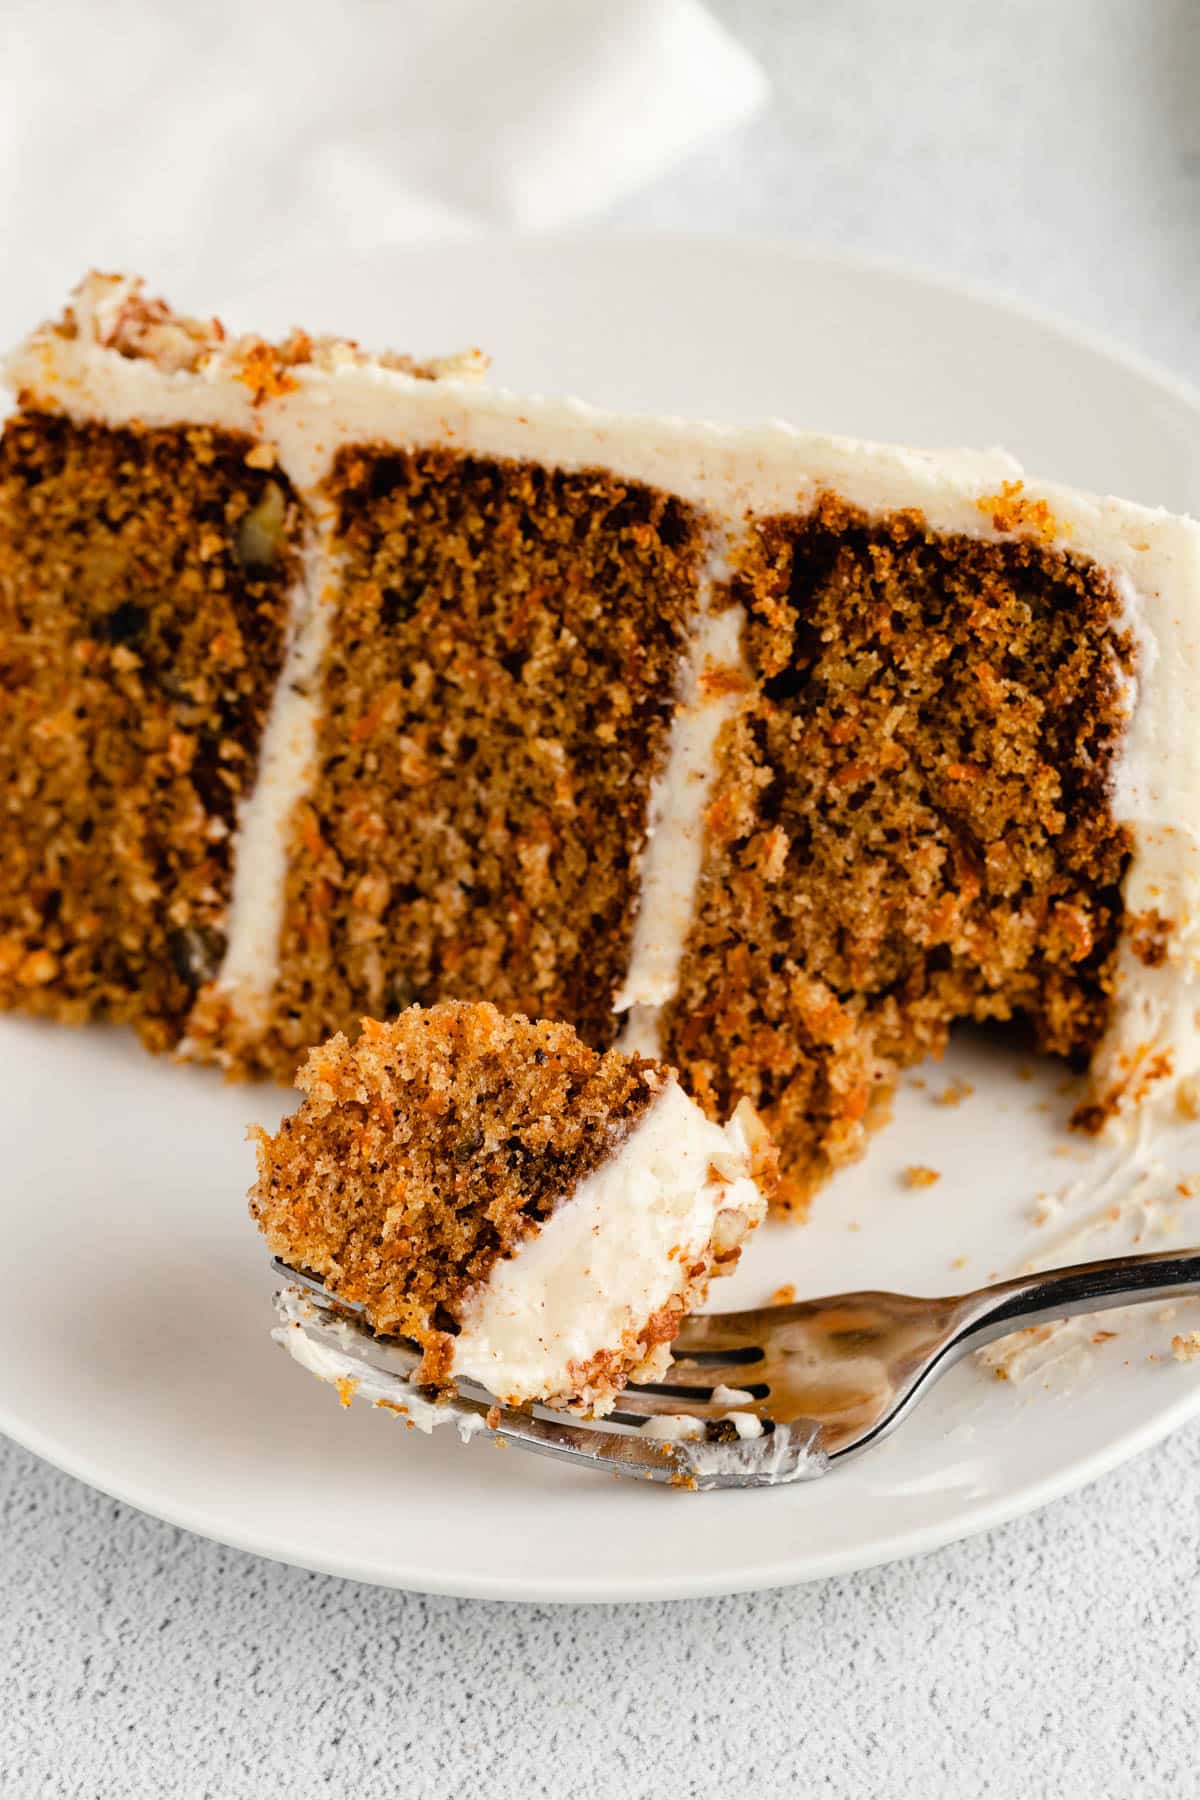 a piece of carrot cake on a plate with one bite on a fork